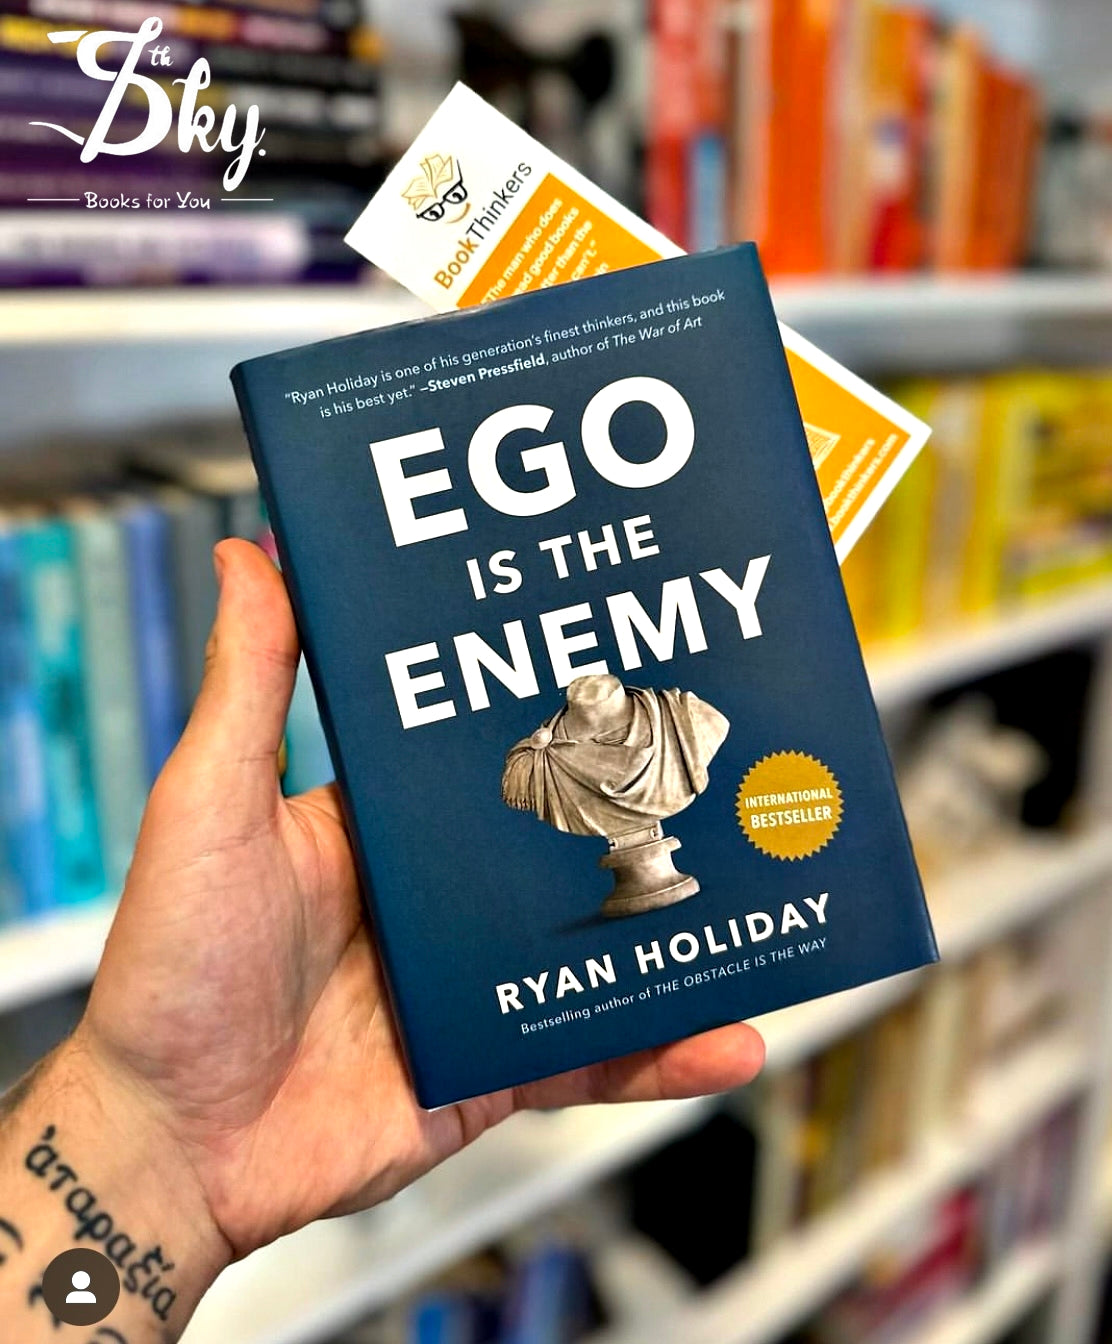 Ego is the enemy- Book by Ryan Holiday